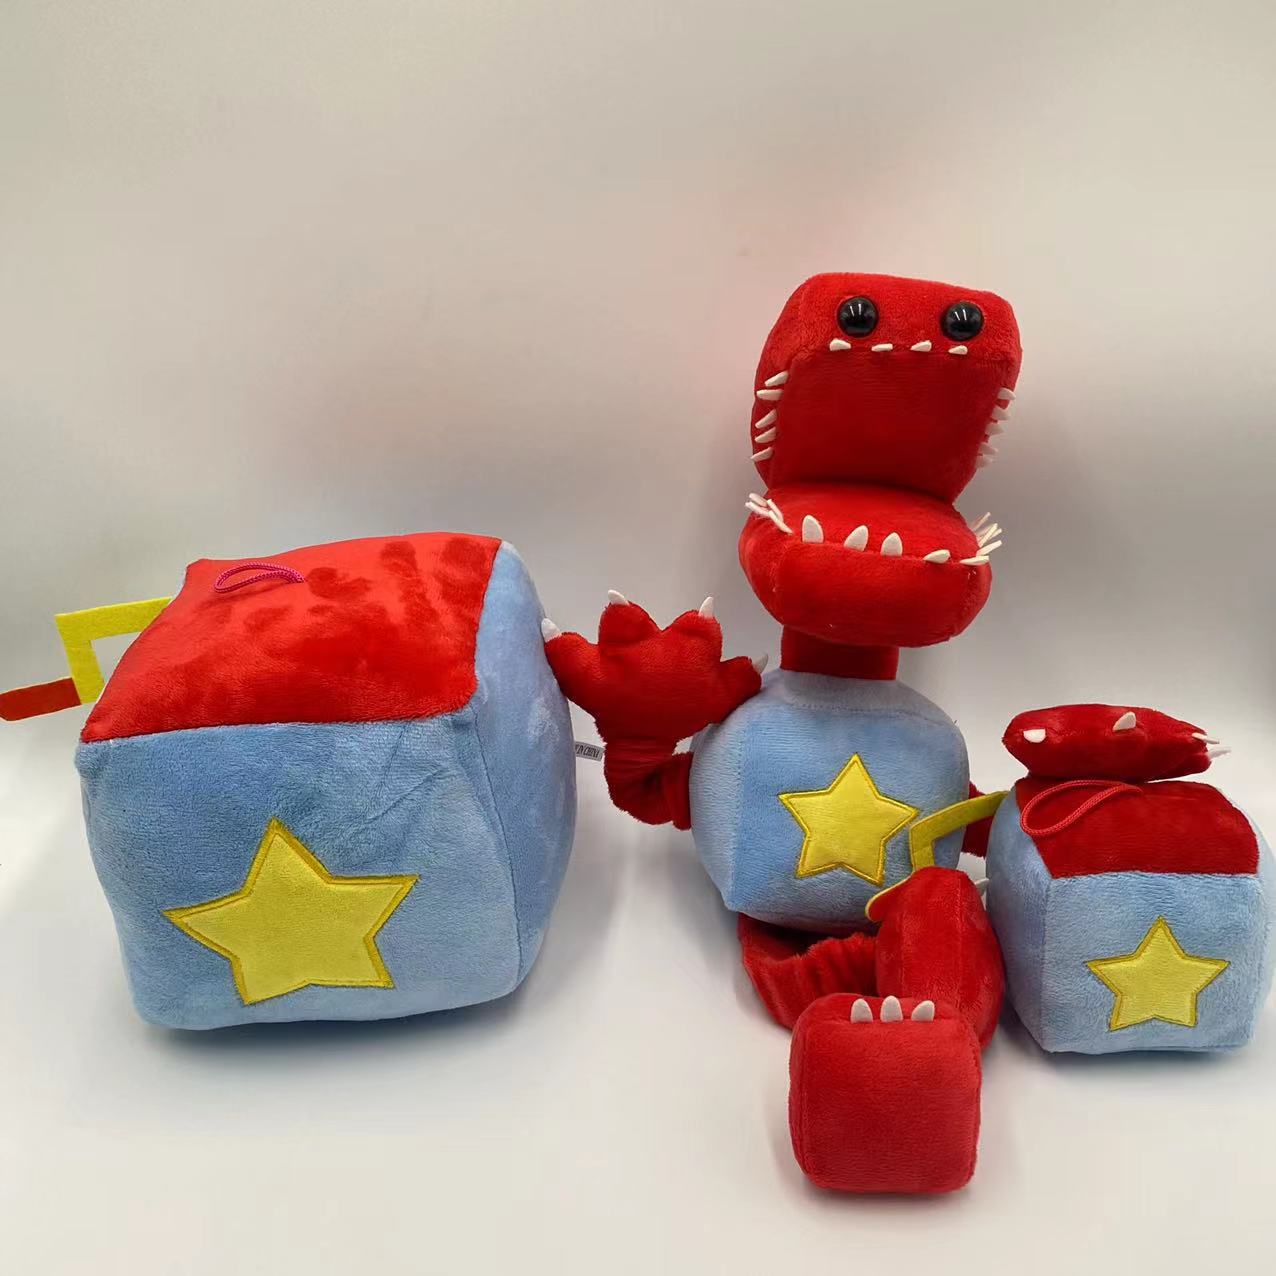 Boxy Boo Toy Cartoon Game Peripheral Red Robot Filled Plush Dolls 40cm Chidlren Toy Gift New 4 - Boxy Boo Plush